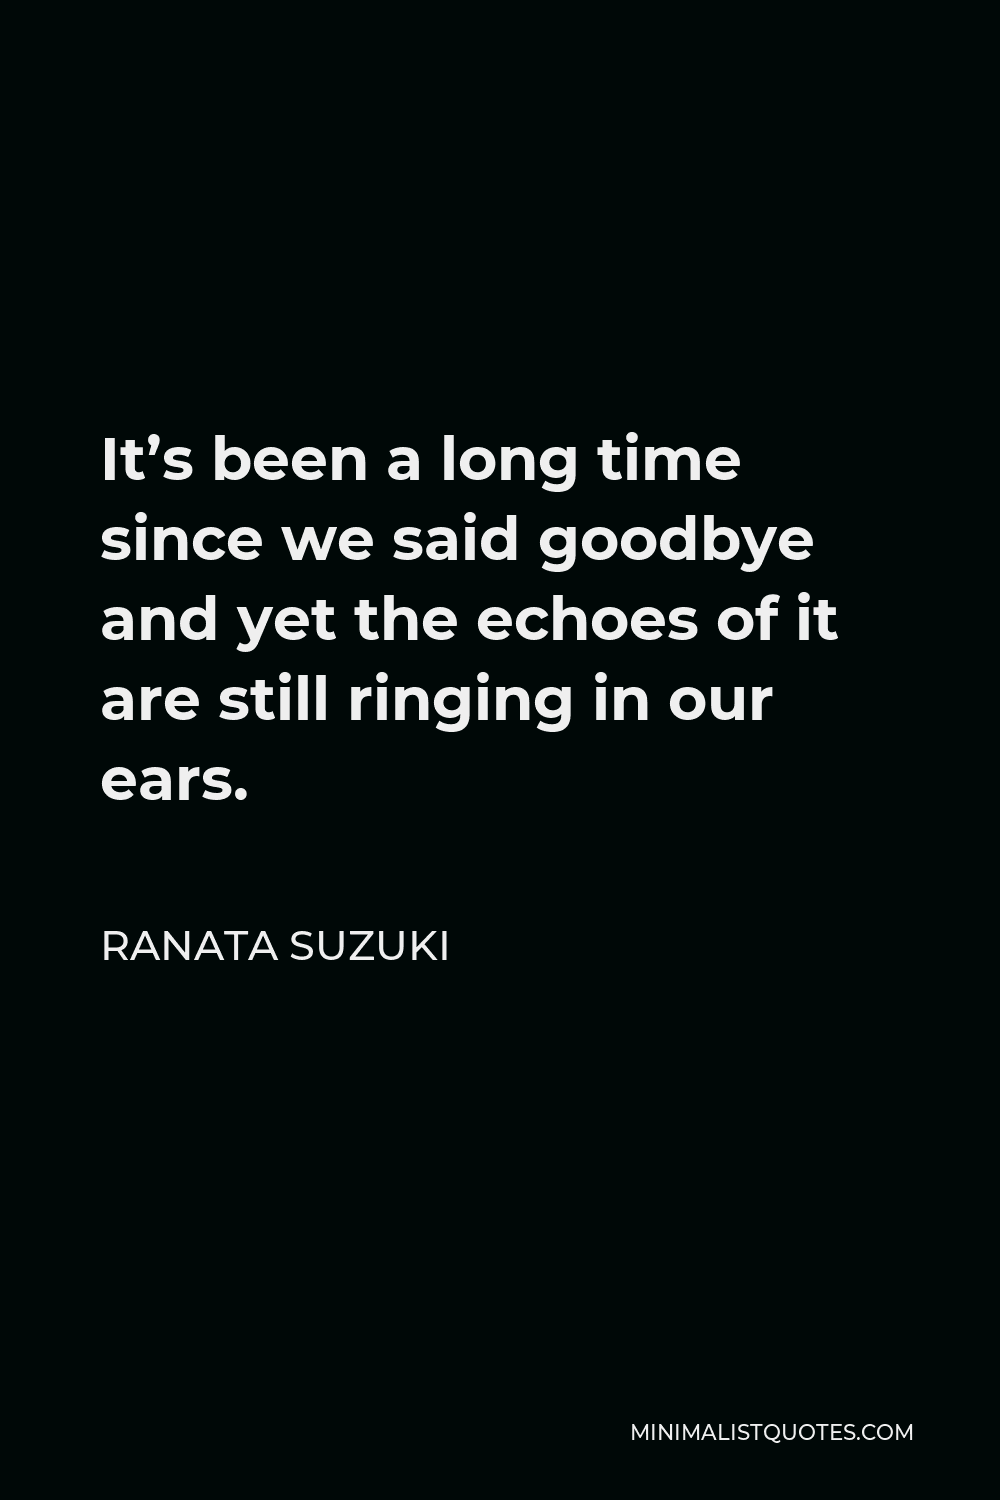 Ranata Suzuki Quote - It’s been a long time since we said goodbye and yet the echoes of it are still ringing in our ears.